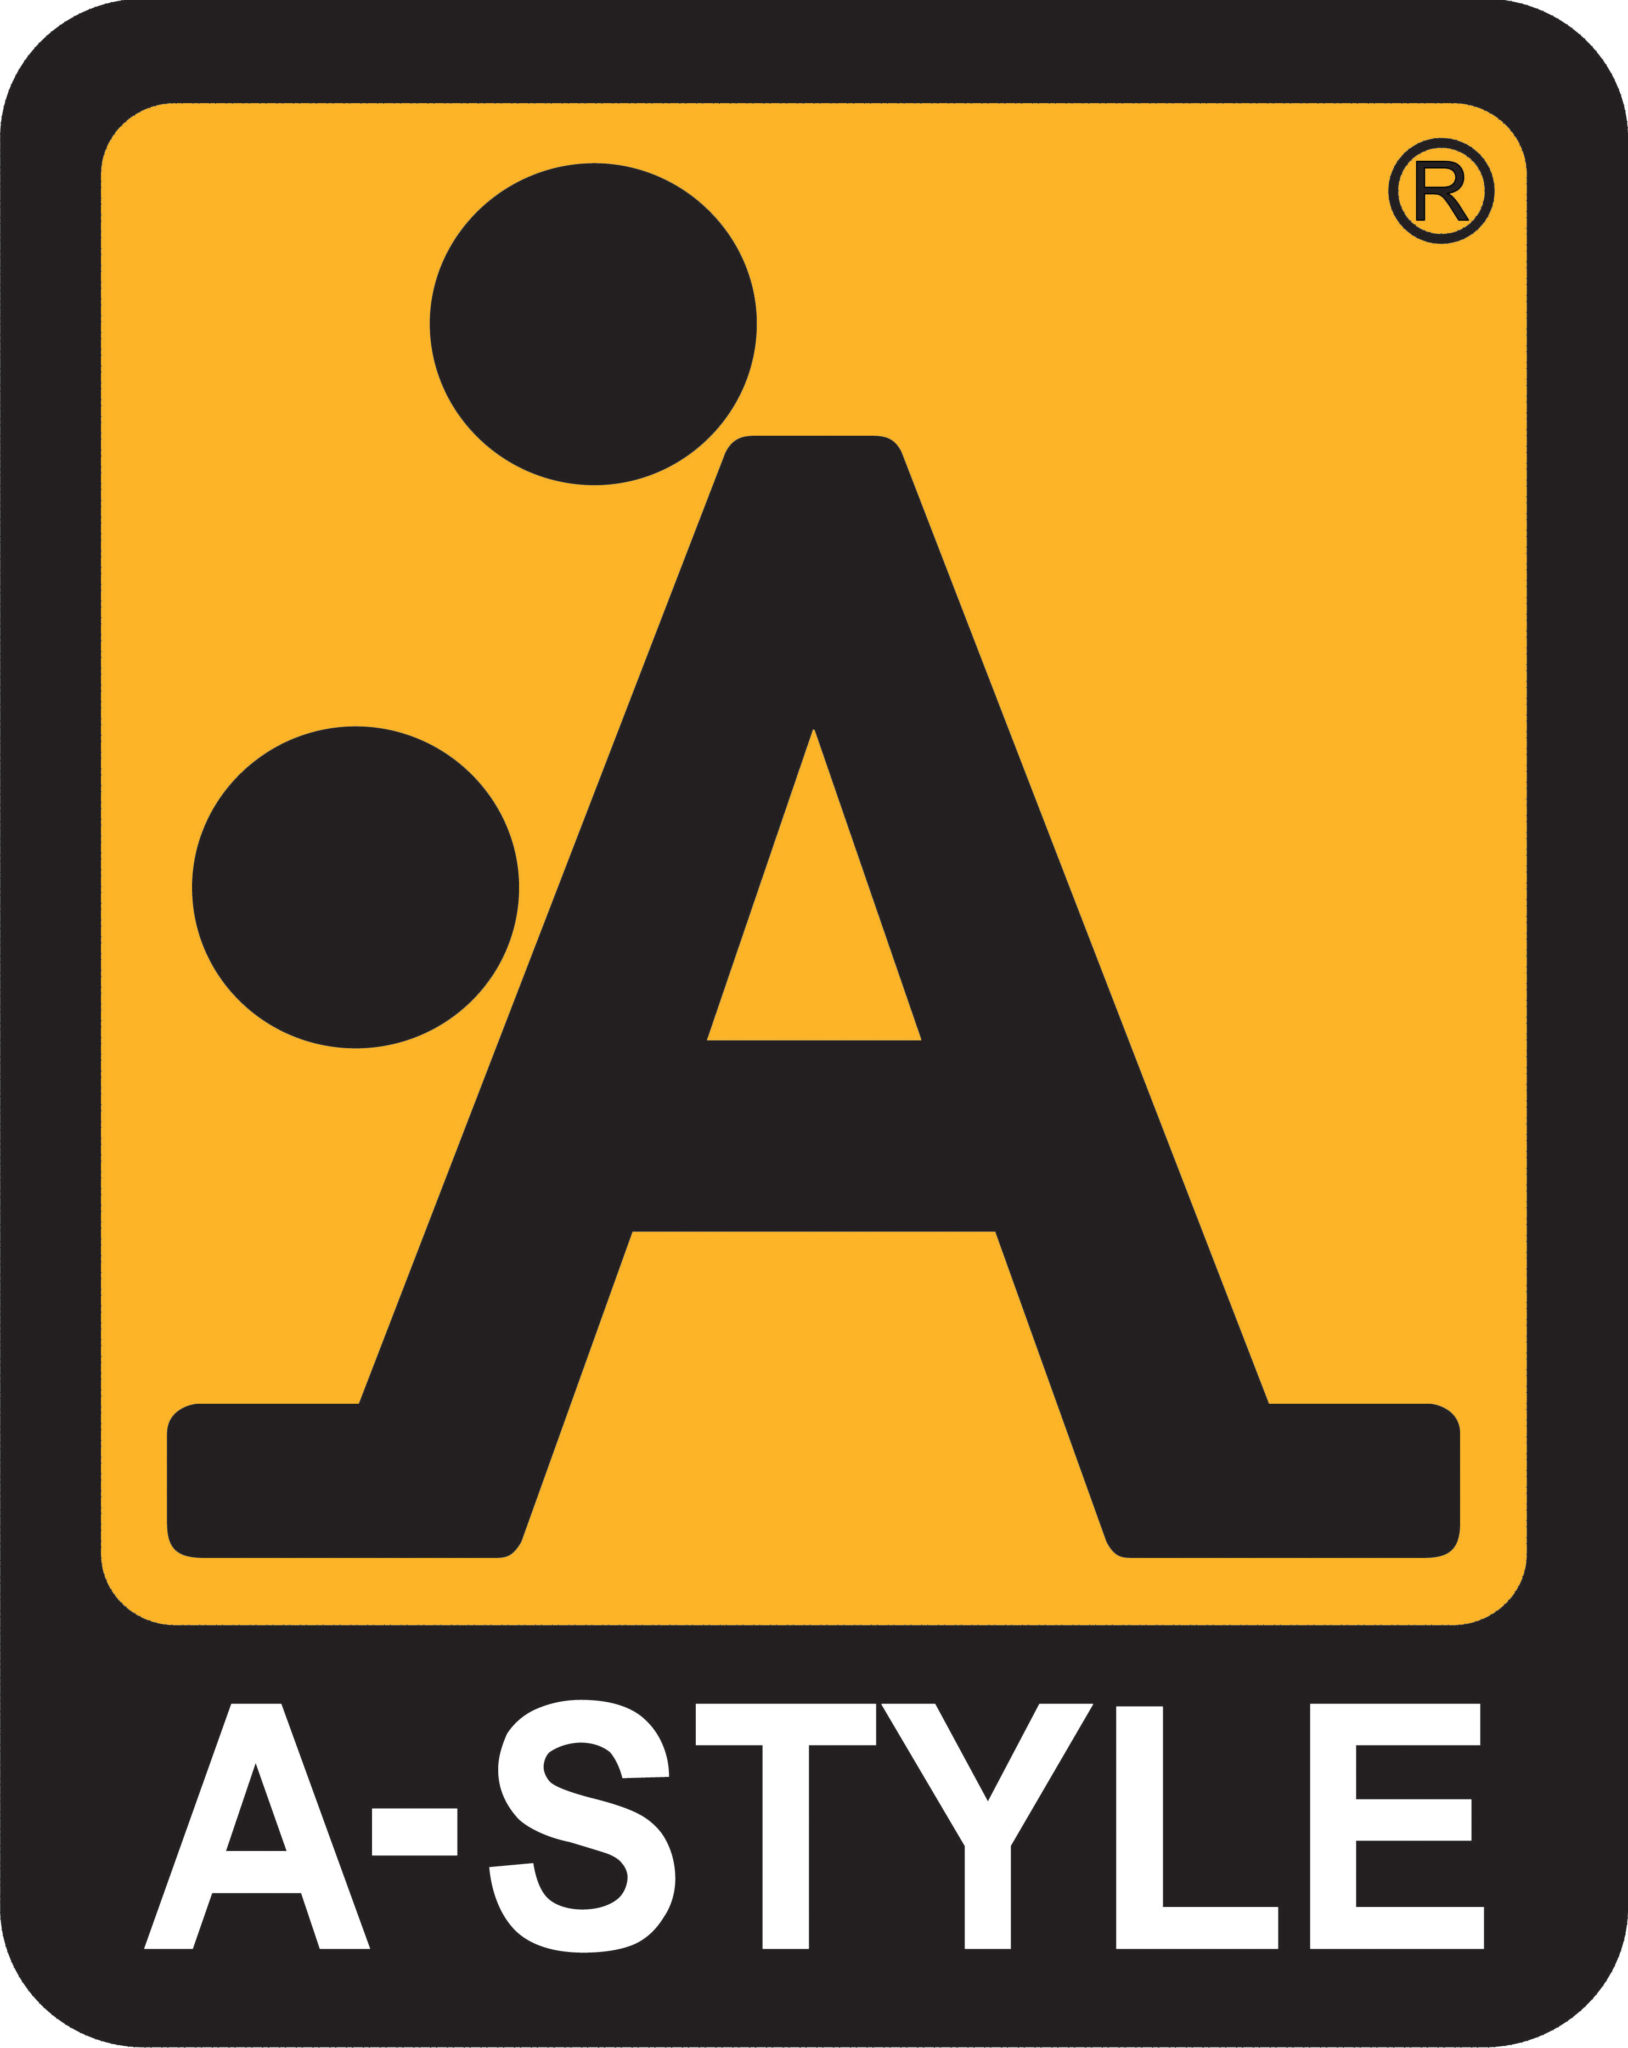 Meet A-Style, the Clothing Company with the Doggie-style Logo | Crasstalk